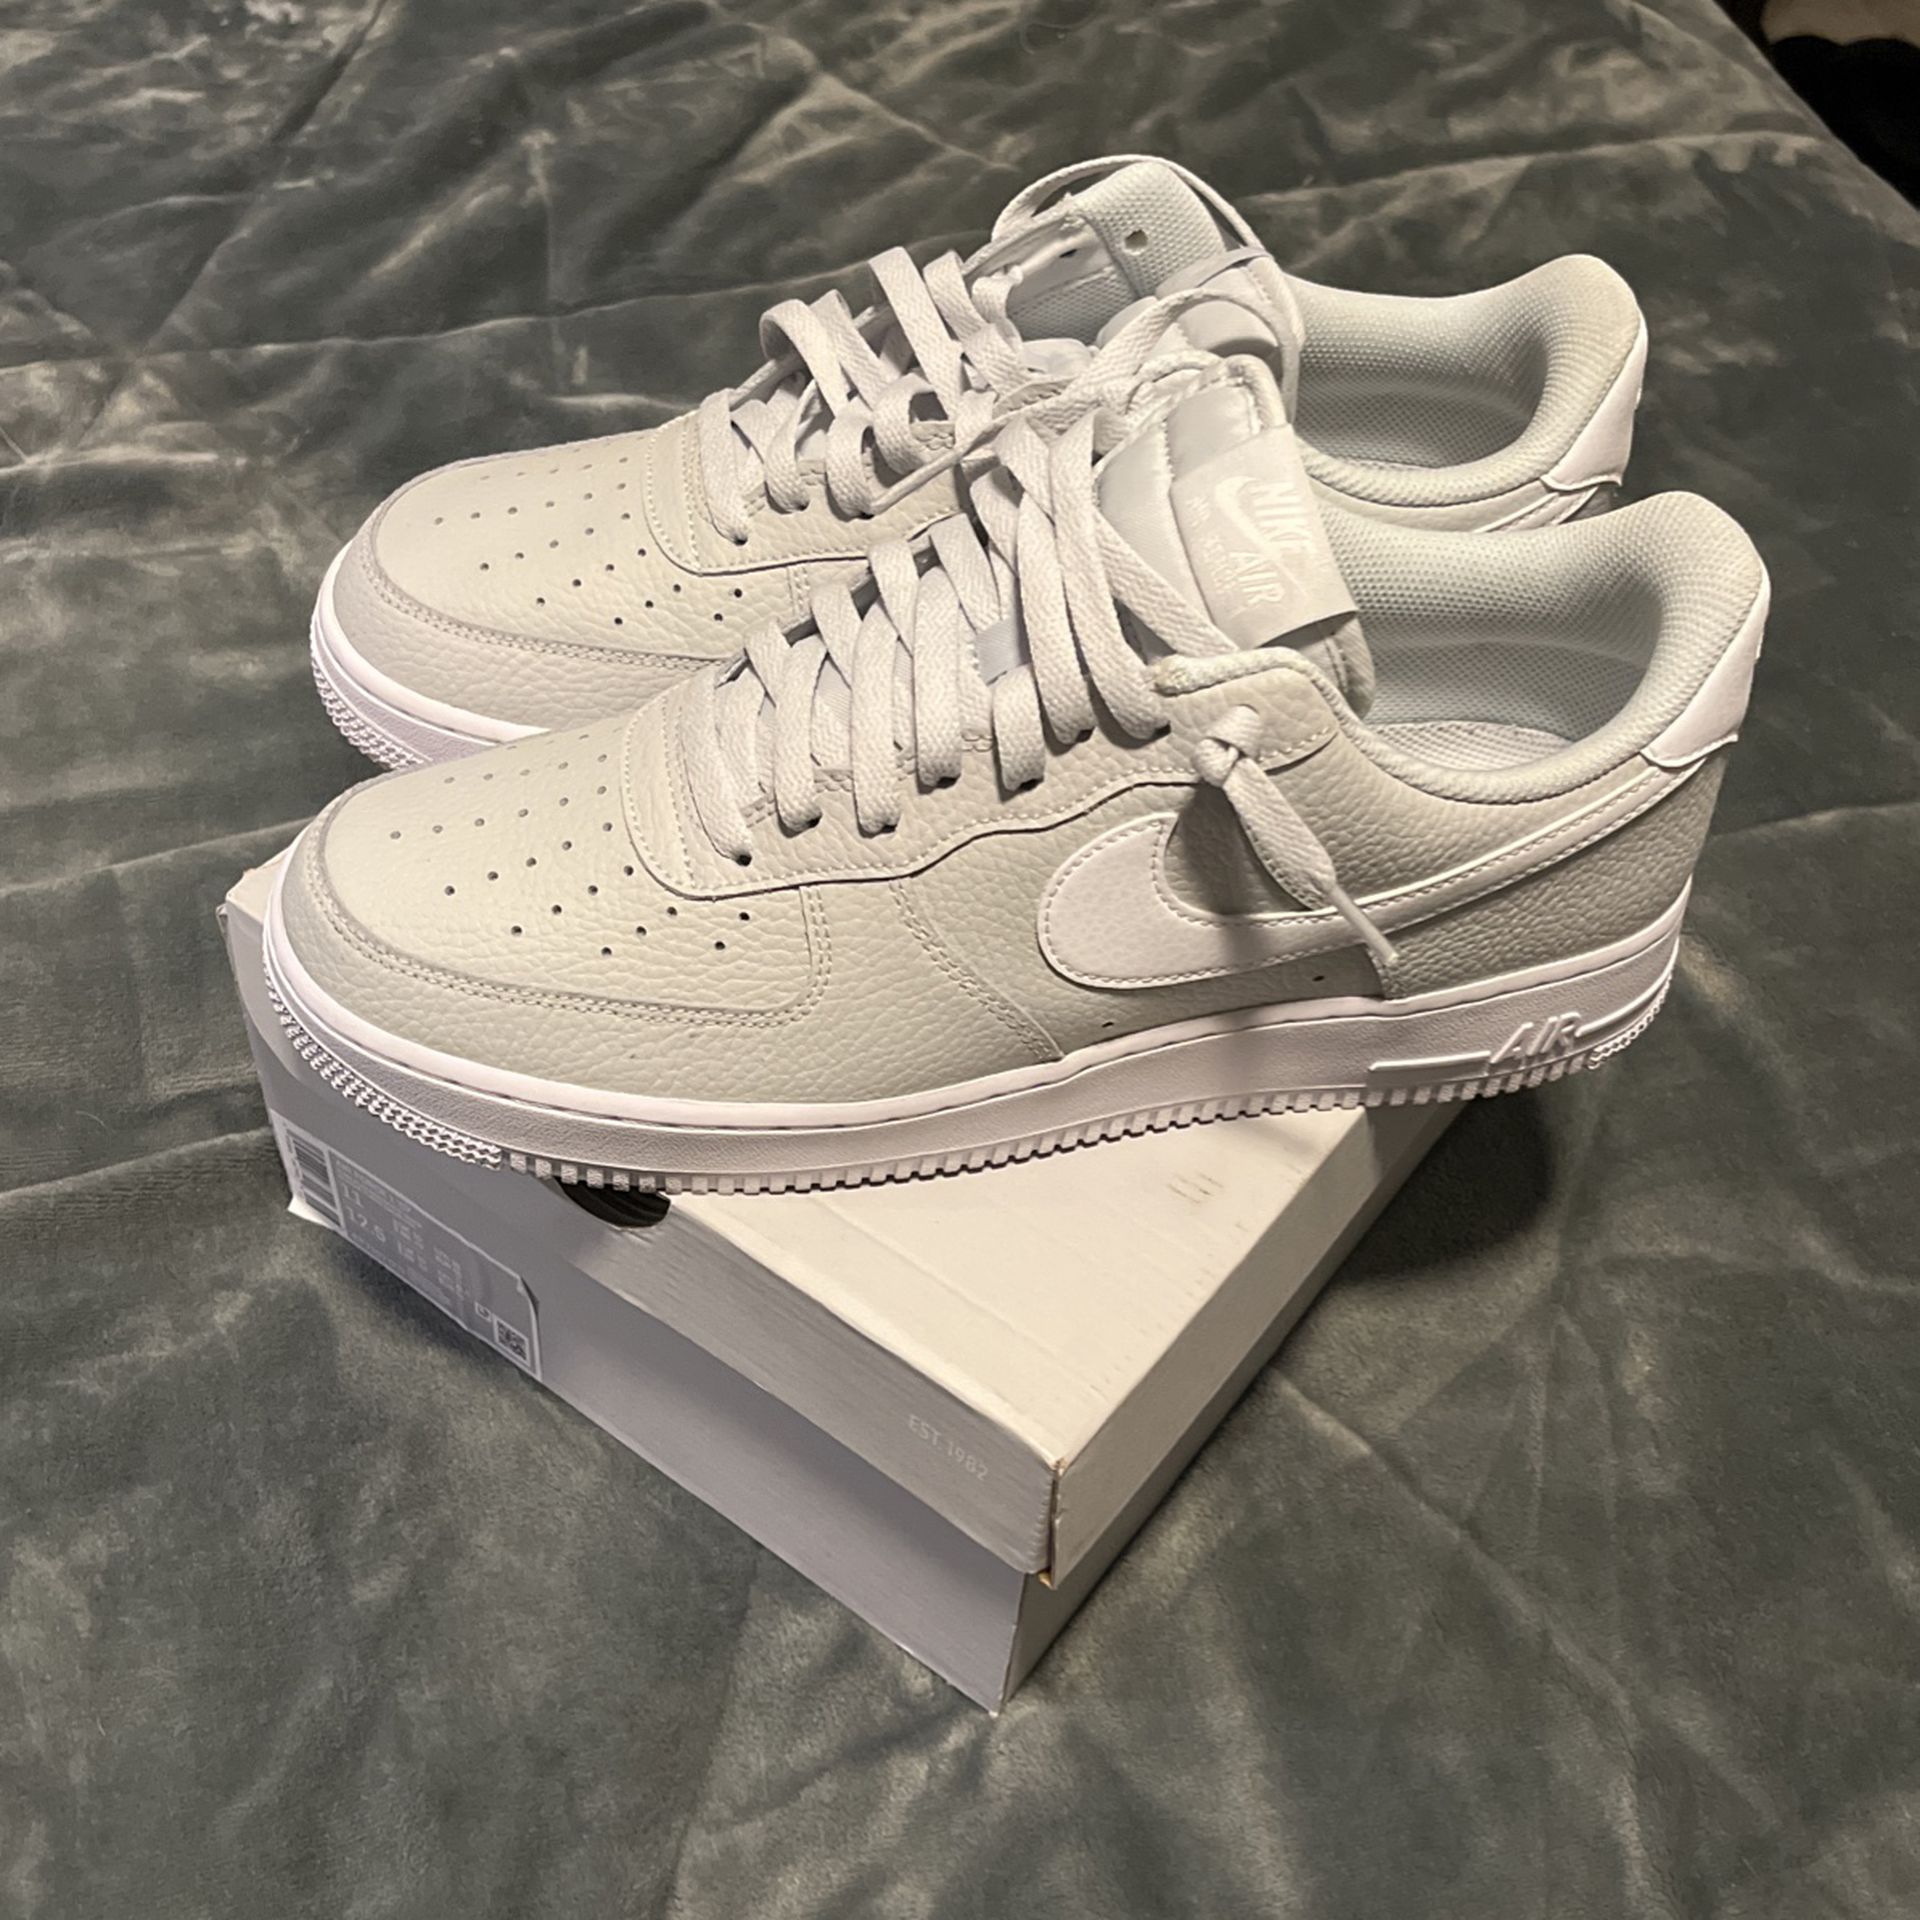 Cool Gray Nike AF1’s for Sale in Aurora, CO - OfferUp